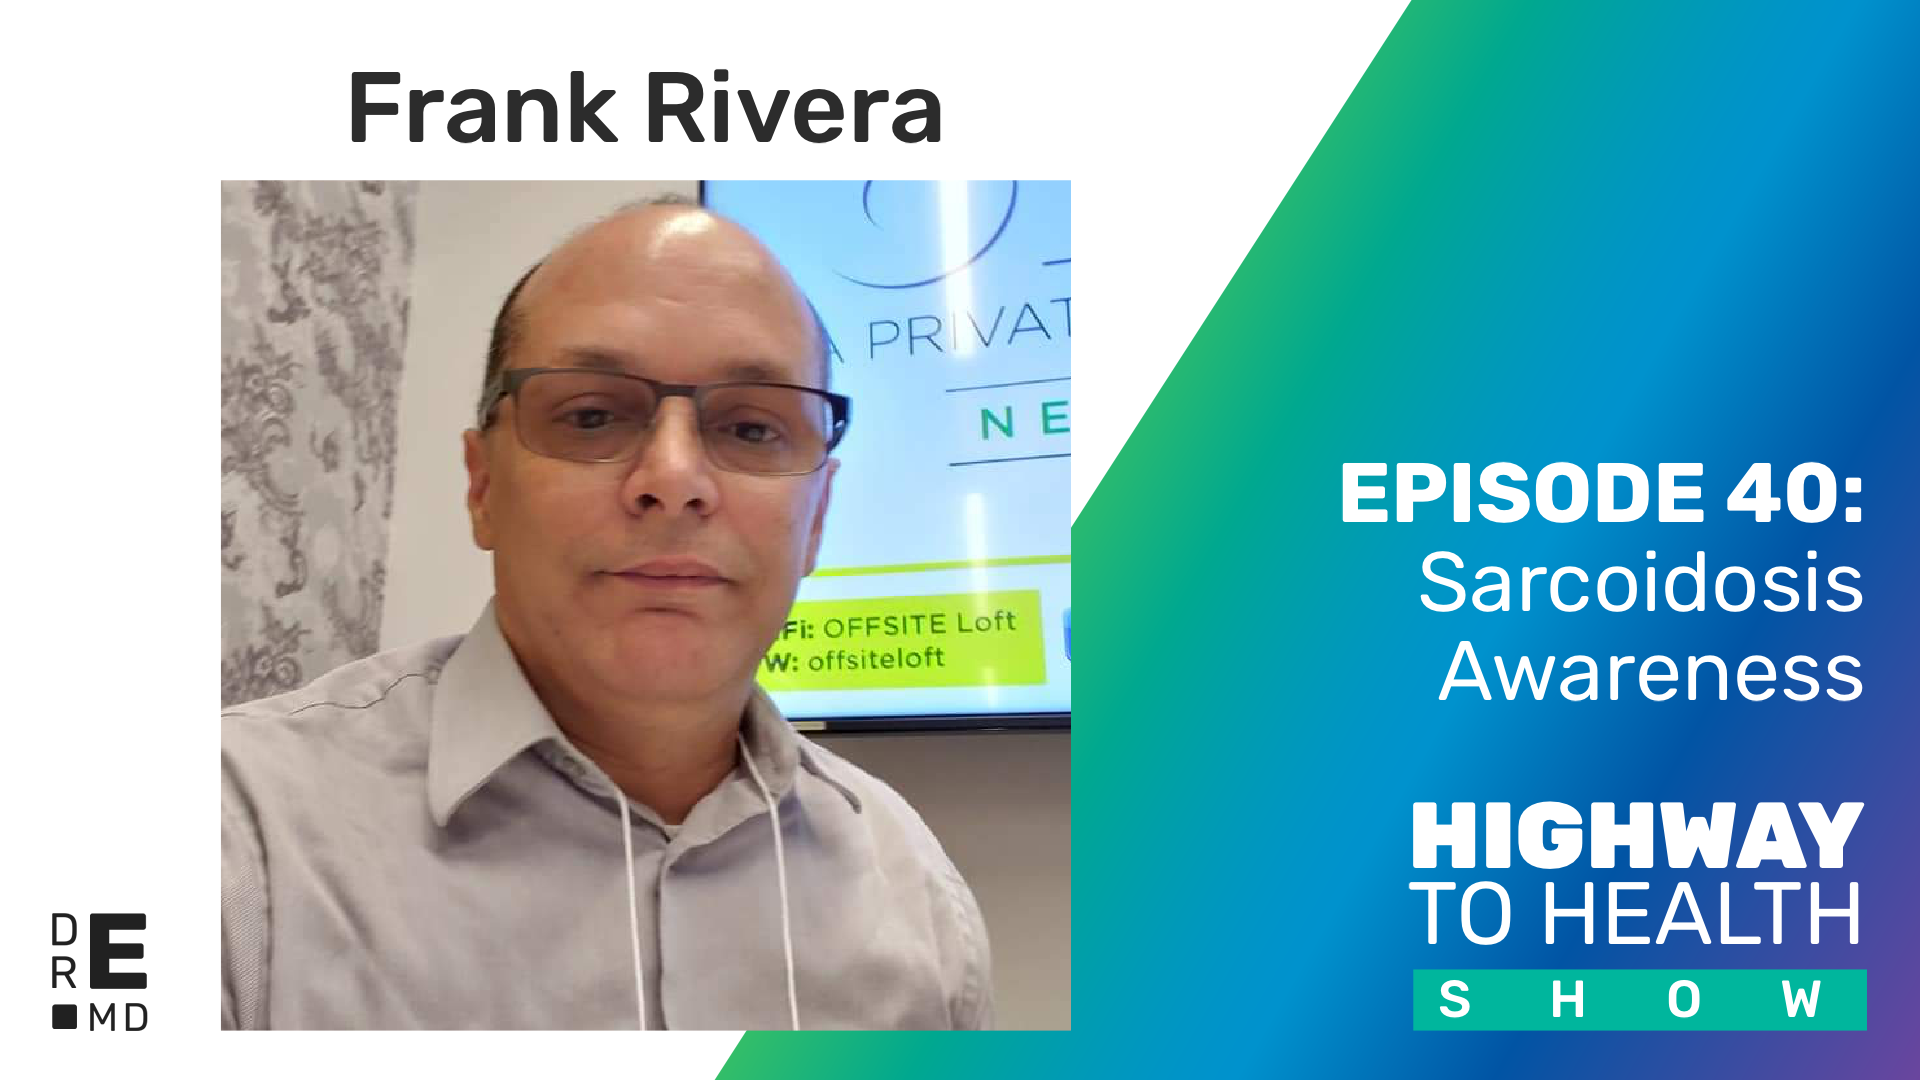 Highway to Health: Ep 40 - Frank Rivera